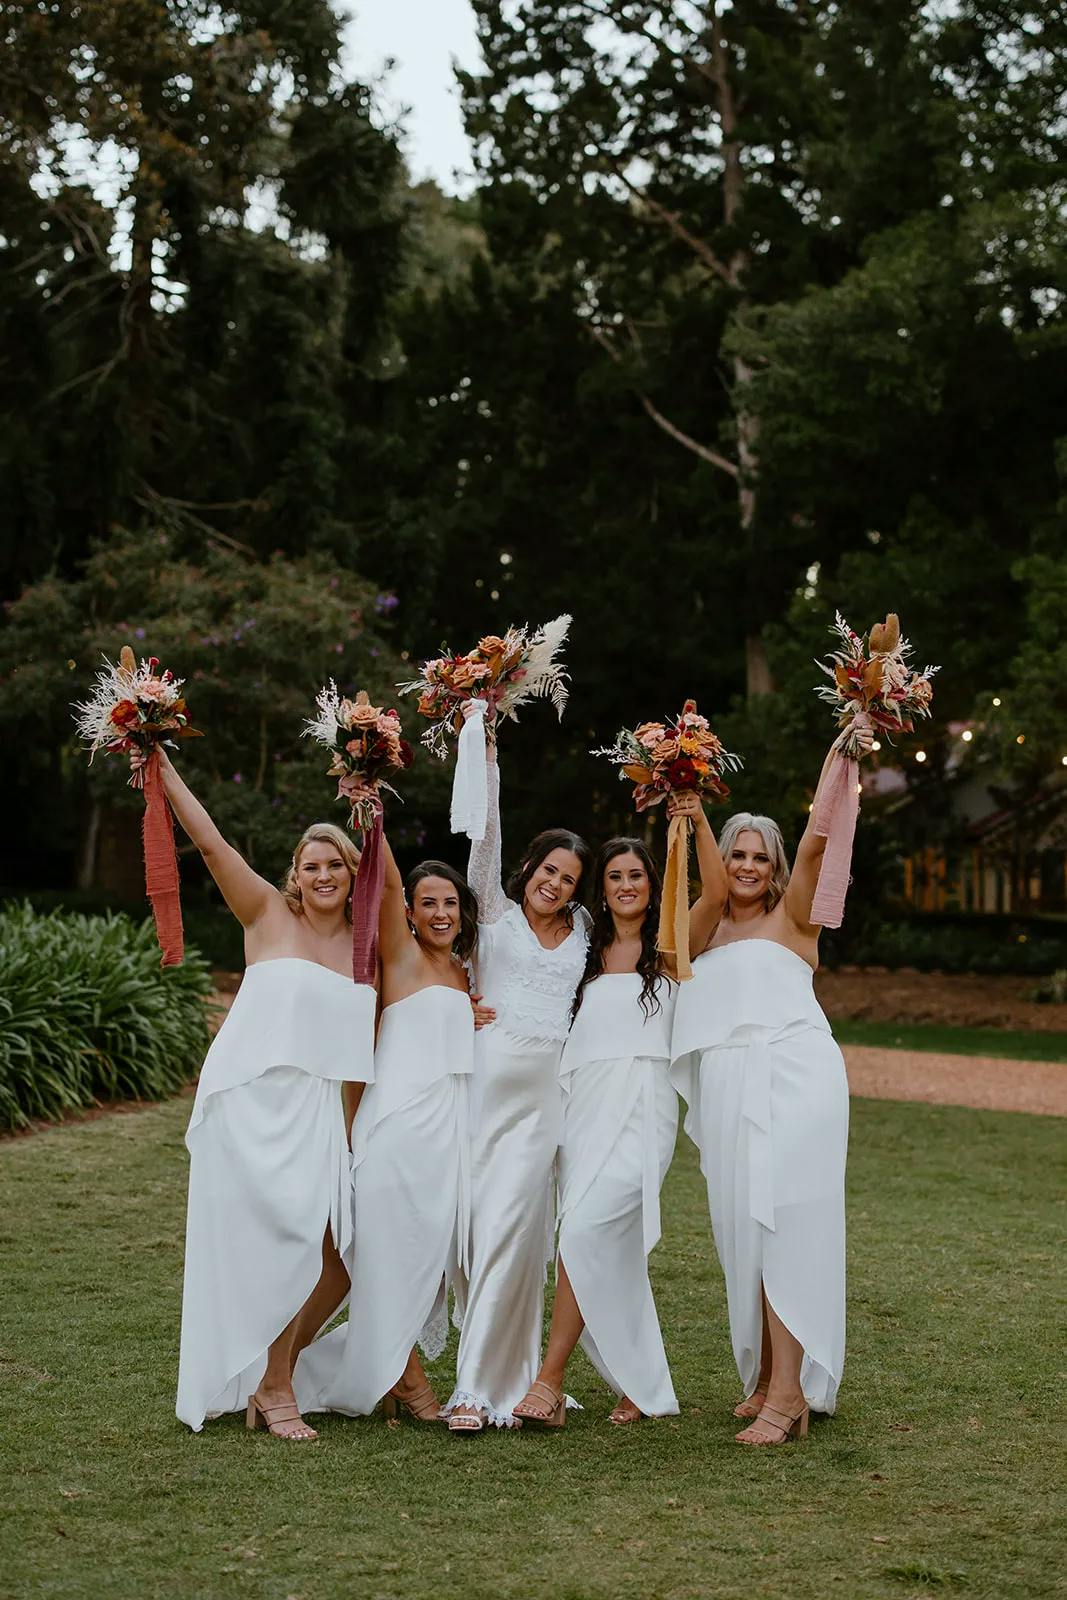 A bride and her four bridesmaids stand on grass outdoors, smiling and celebrating. The bride wears a long white dress, and the bridesmaids wear matching off-shoulder white dresses. Each woman holds a colorful bouquet of flowers, raising them joyfully in the air.